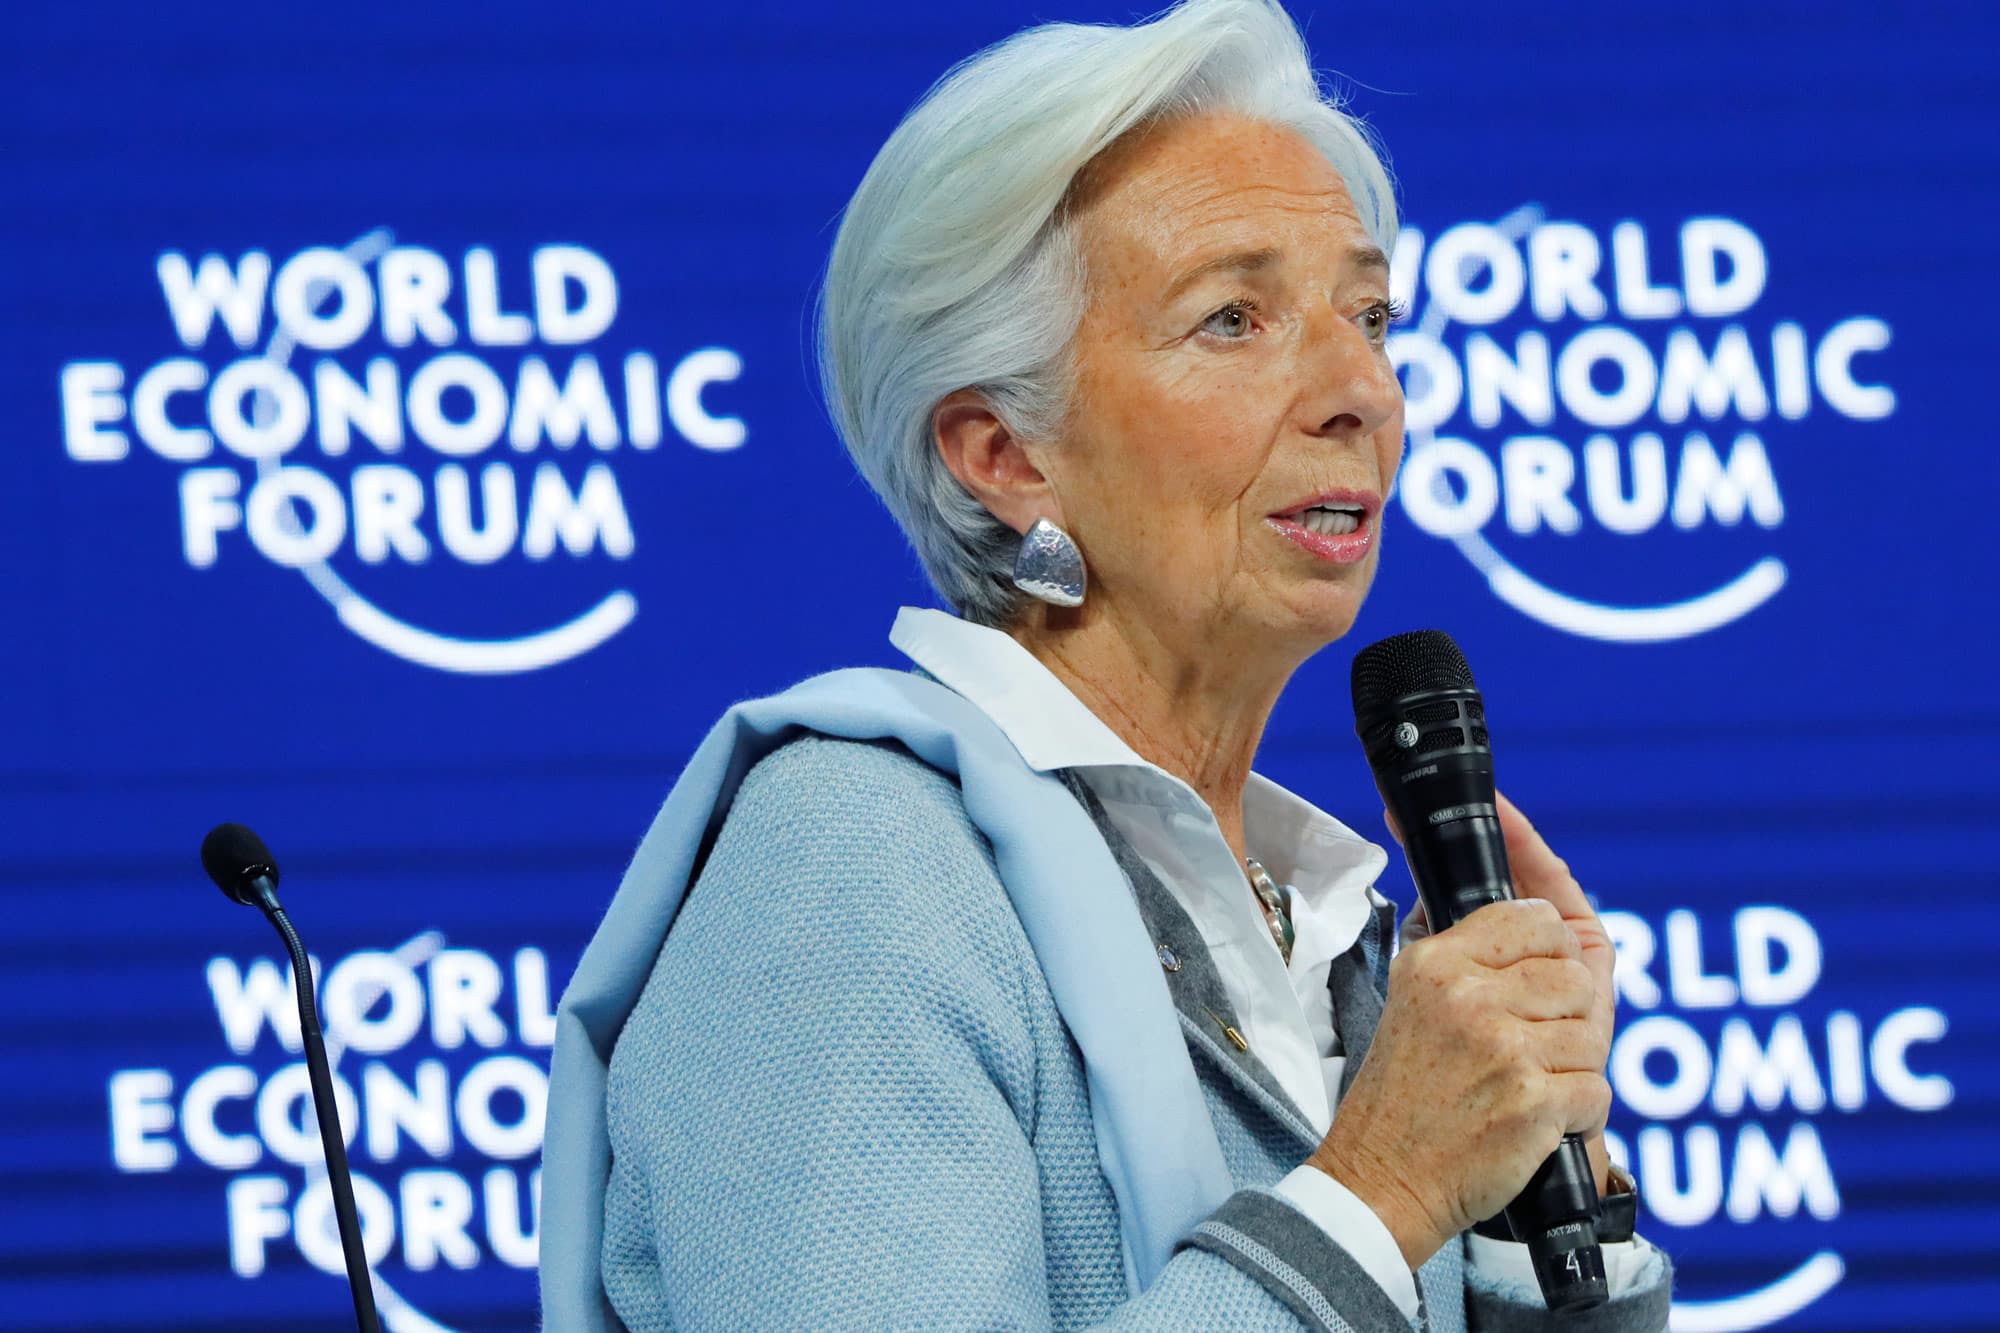 ECB’s Lagarde and IMF’s discuss the global economic outlook